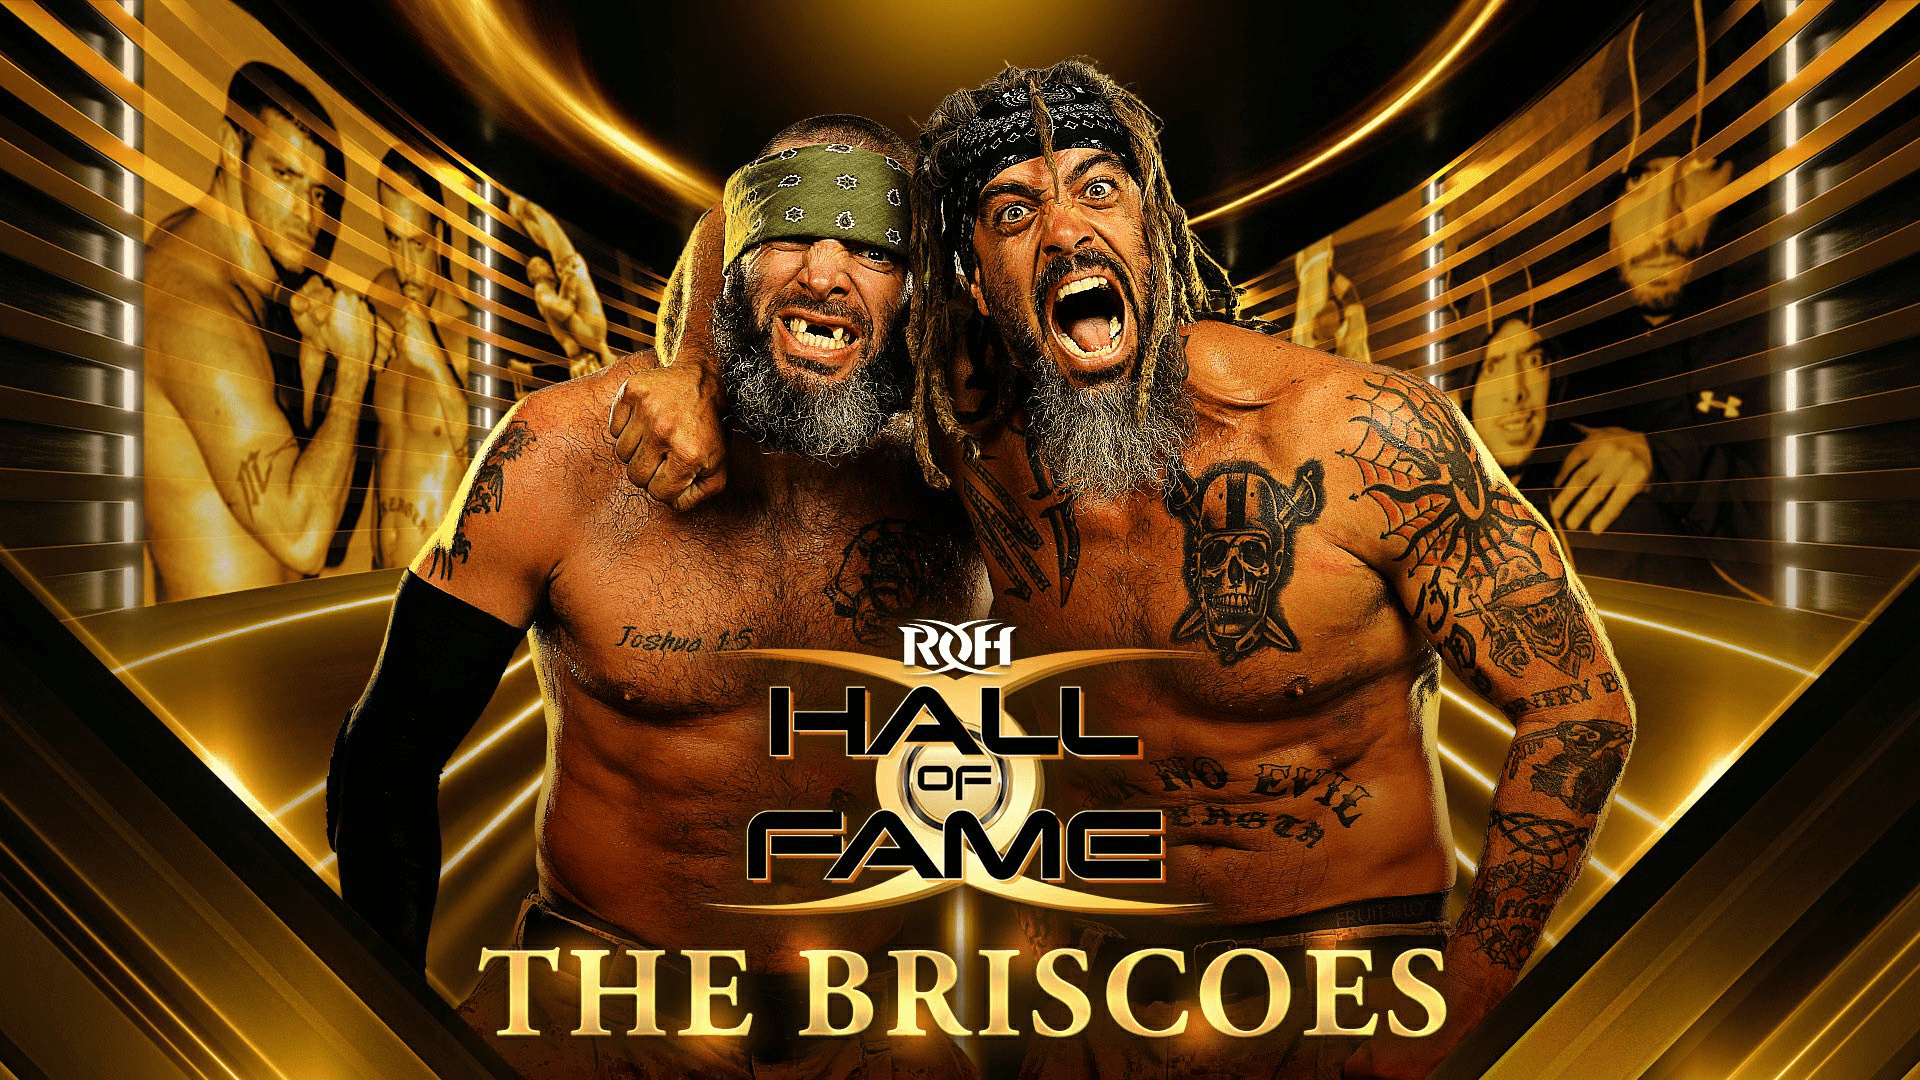 Briscoe Brothers Hall of Fame ROH 2022